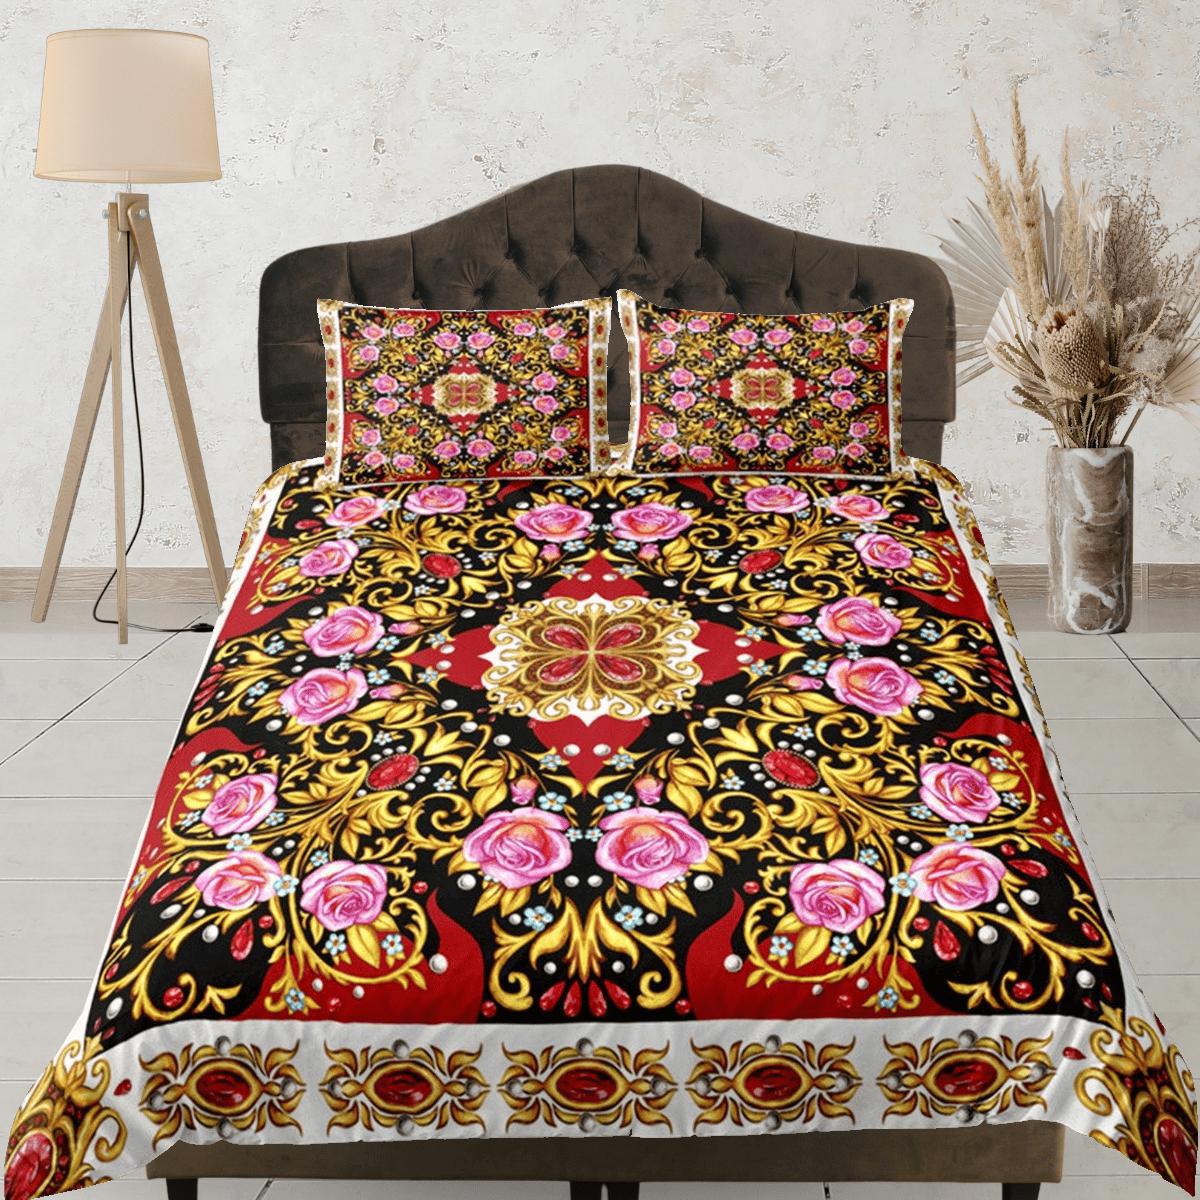 daintyduvet Mixed Baroque Gold Luxury Duvet Cover Set Aesthetic Bedding Set Full Victorian Decor, Colorful Bedspread